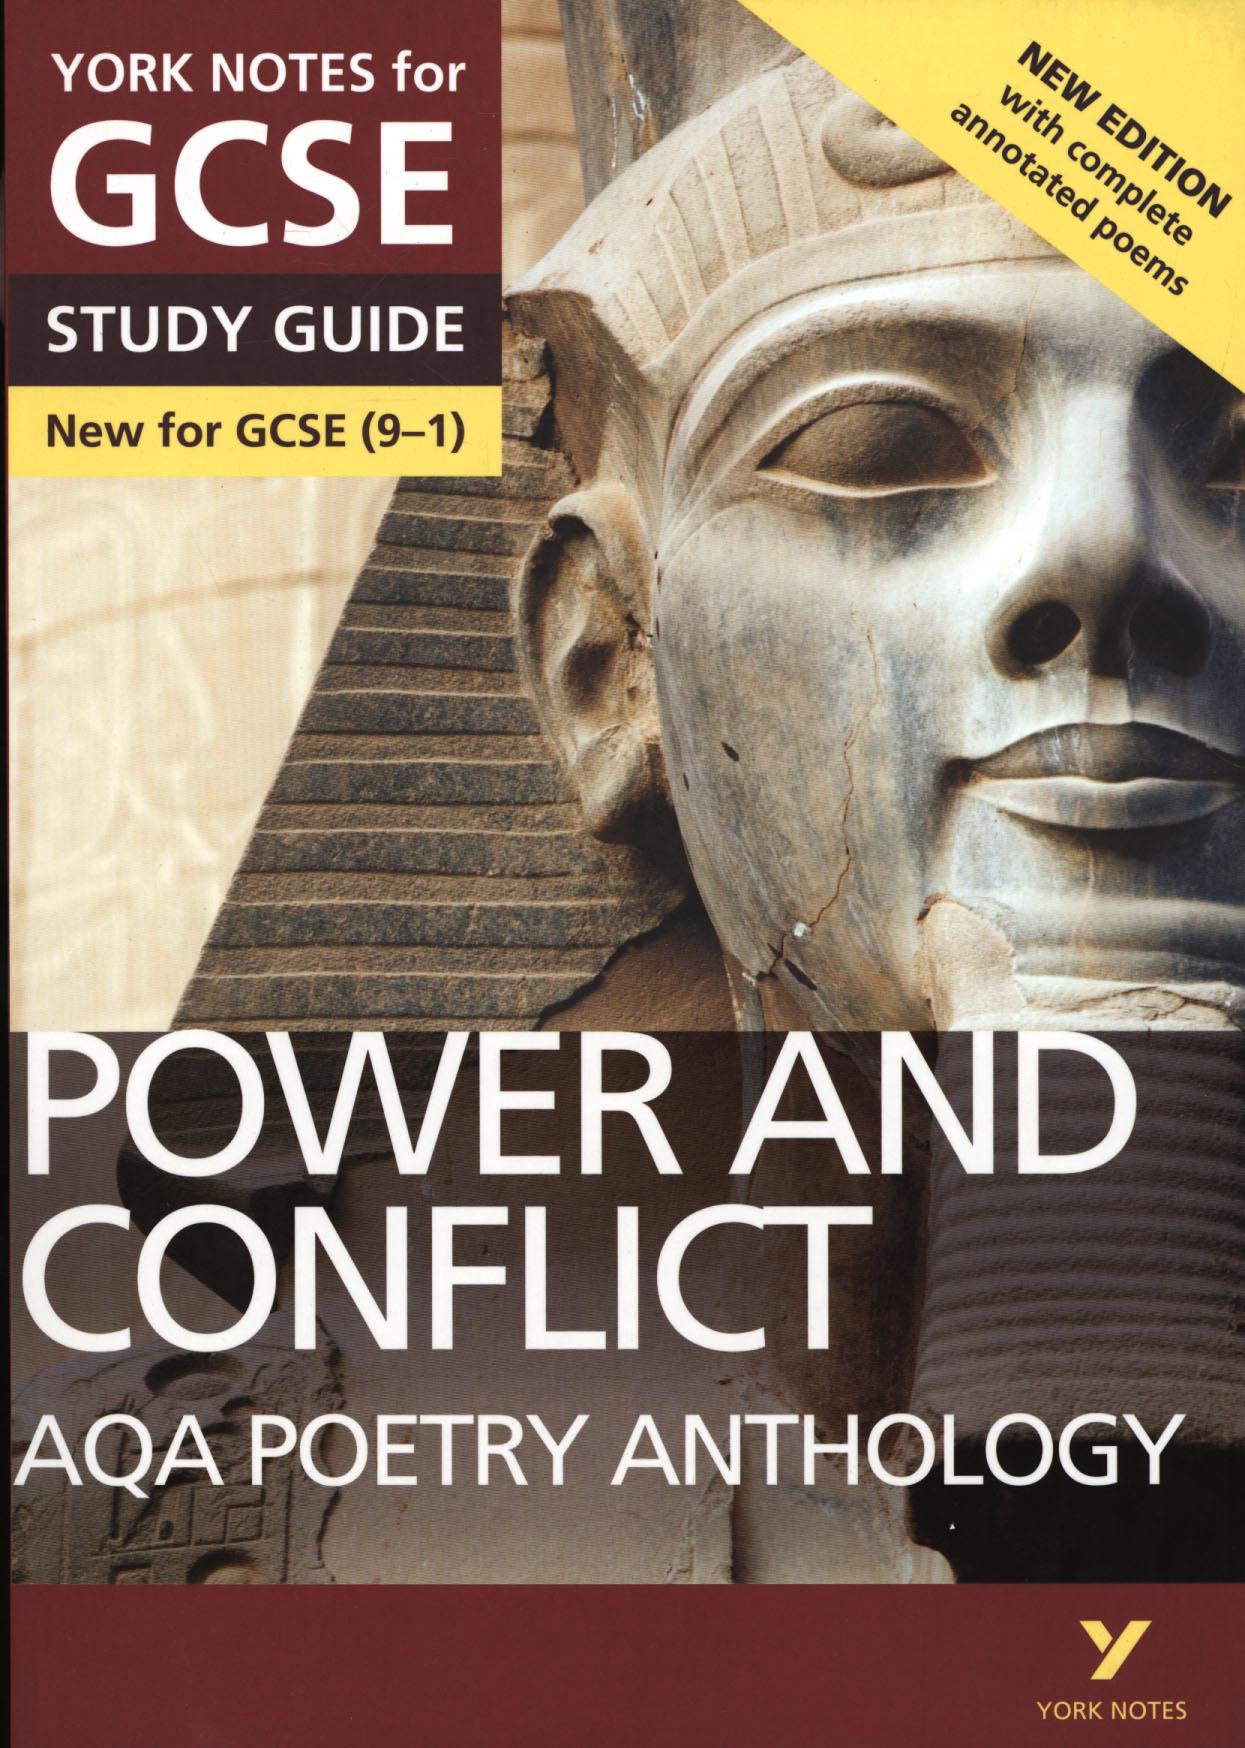 AQA Poetry Anthology - Power and Conflict: York Notes for GC